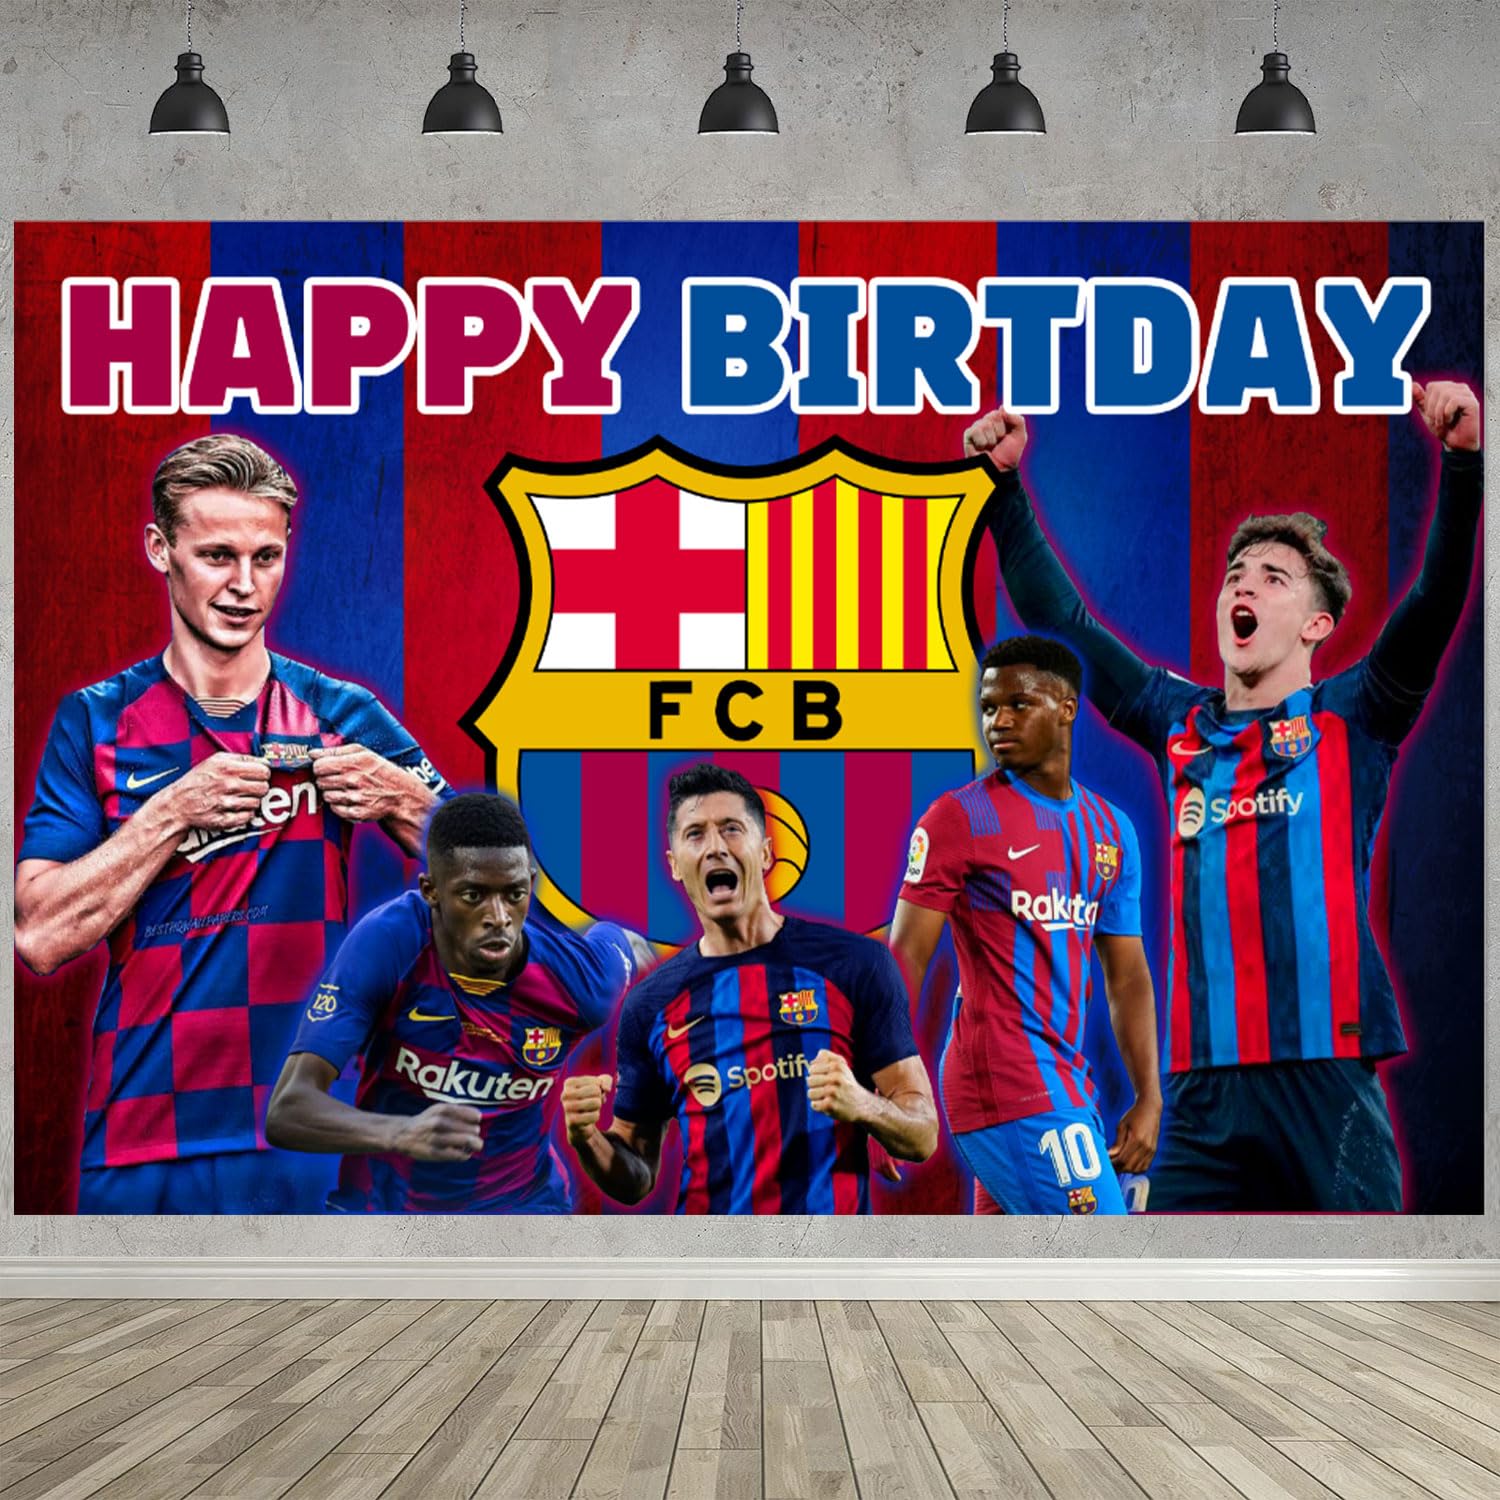 Barcelona Birthday Party Decoration,Soccer Party Photo Background 5 x 3 FT and 18 Pcs Balloon,Football Merch Party Backdrop Supplies